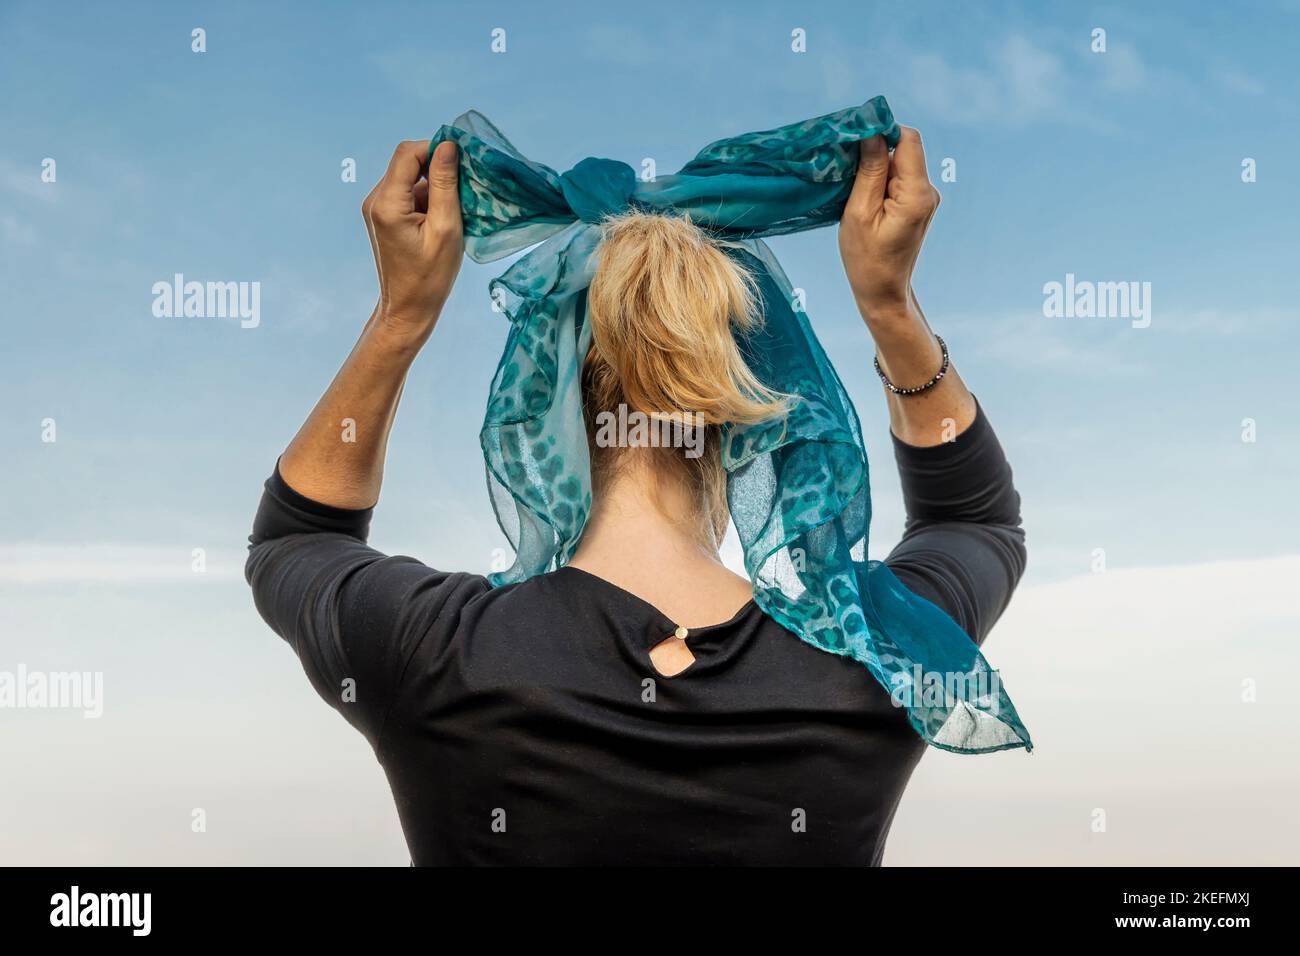 A blonde woman from behind, ties her hair with a green and blue scarf Stock Photo